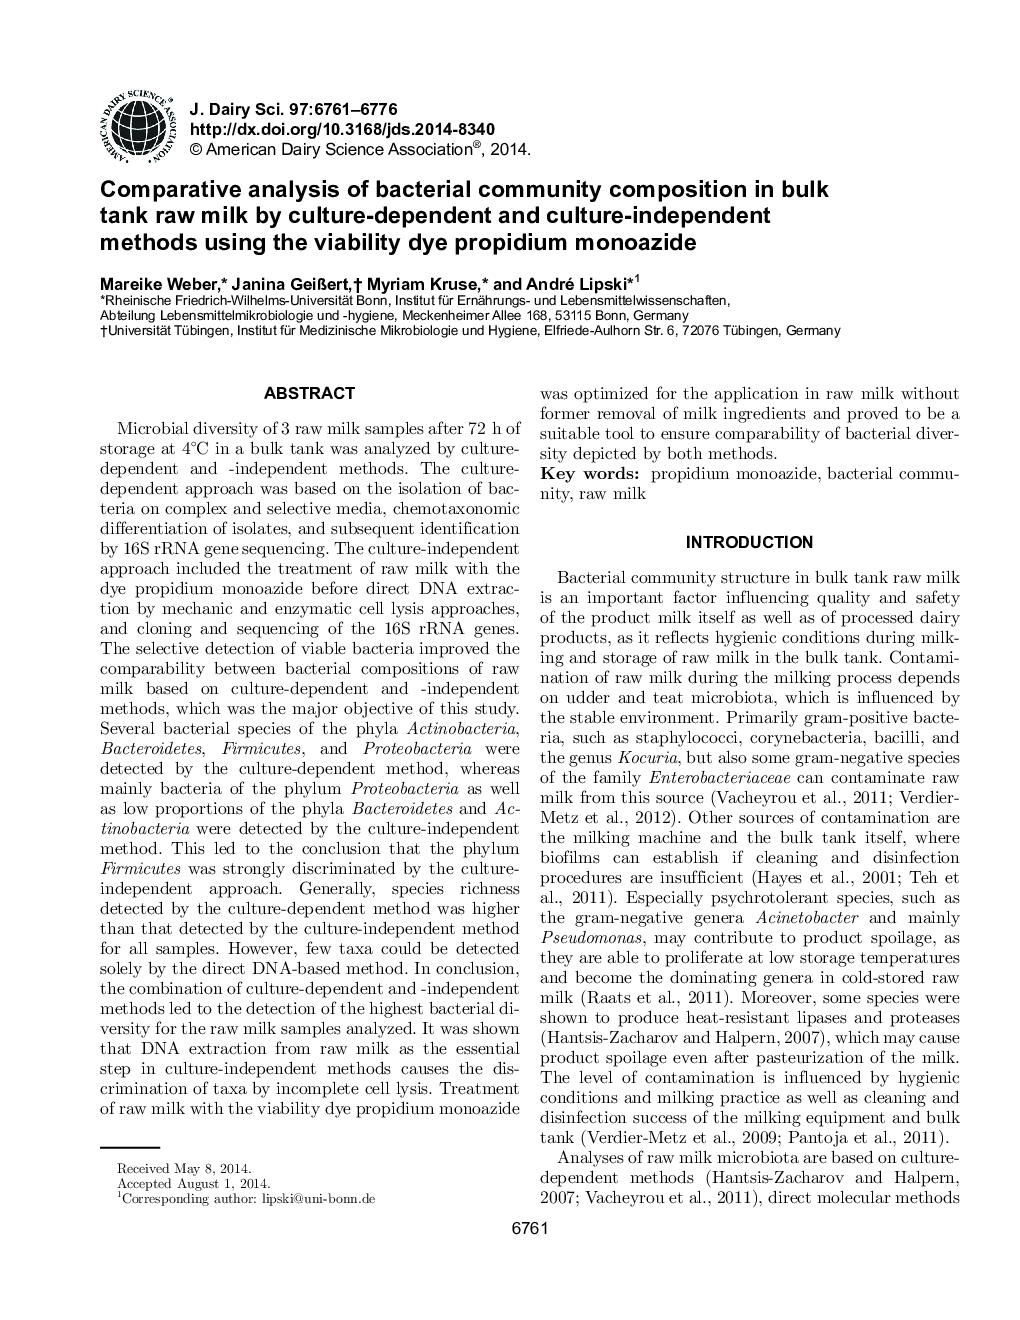 Comparative analysis of bacterial community composition in bulk tank raw milk by culture-dependent and culture-independent methods using the viability dye propidium monoazide